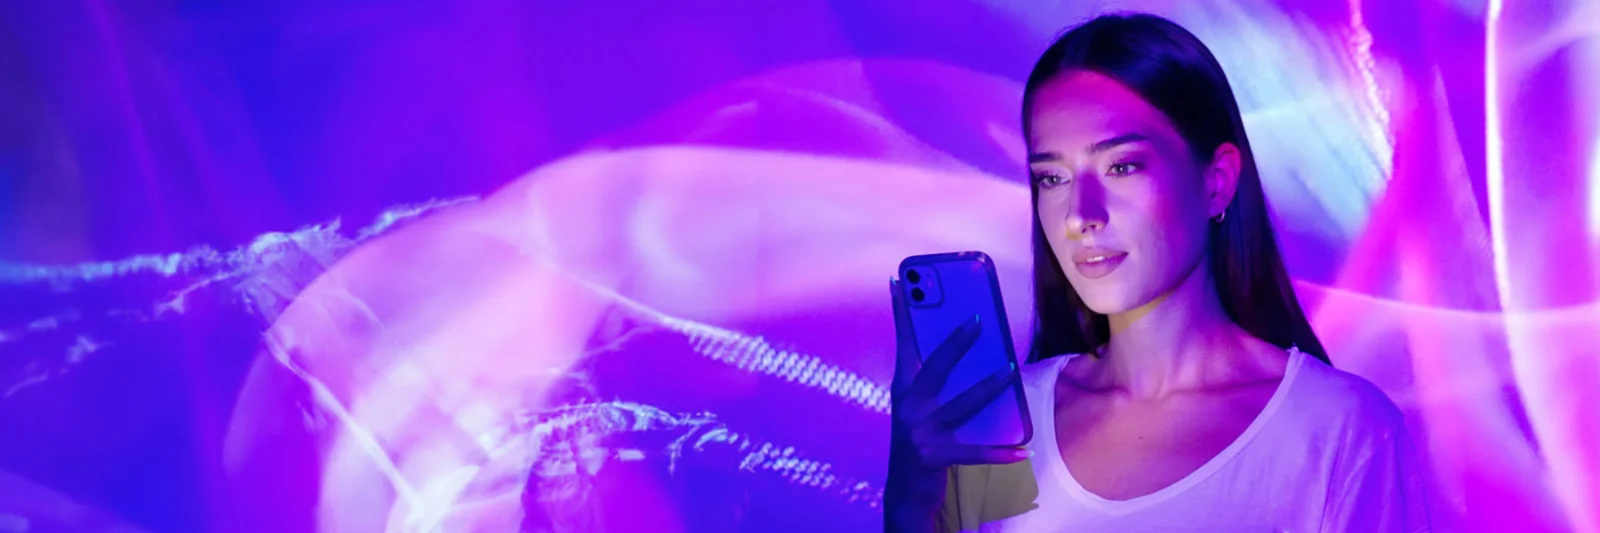 This key visual for GFT Banking Agent showcases a woman holding a smartphone, enveloped in a mesmerizing display of abstract purple and pink lights. The image evokes a sense of modern technology and digital innovation, reflecting the dynamic and futuristic nature of the GFT Banking Agent. The interplay of lights and shadows creates an immersive and visually captivating atmosphere, symbolizing the seamless integration of advanced AI and banking technology in enhancing customer experiences.